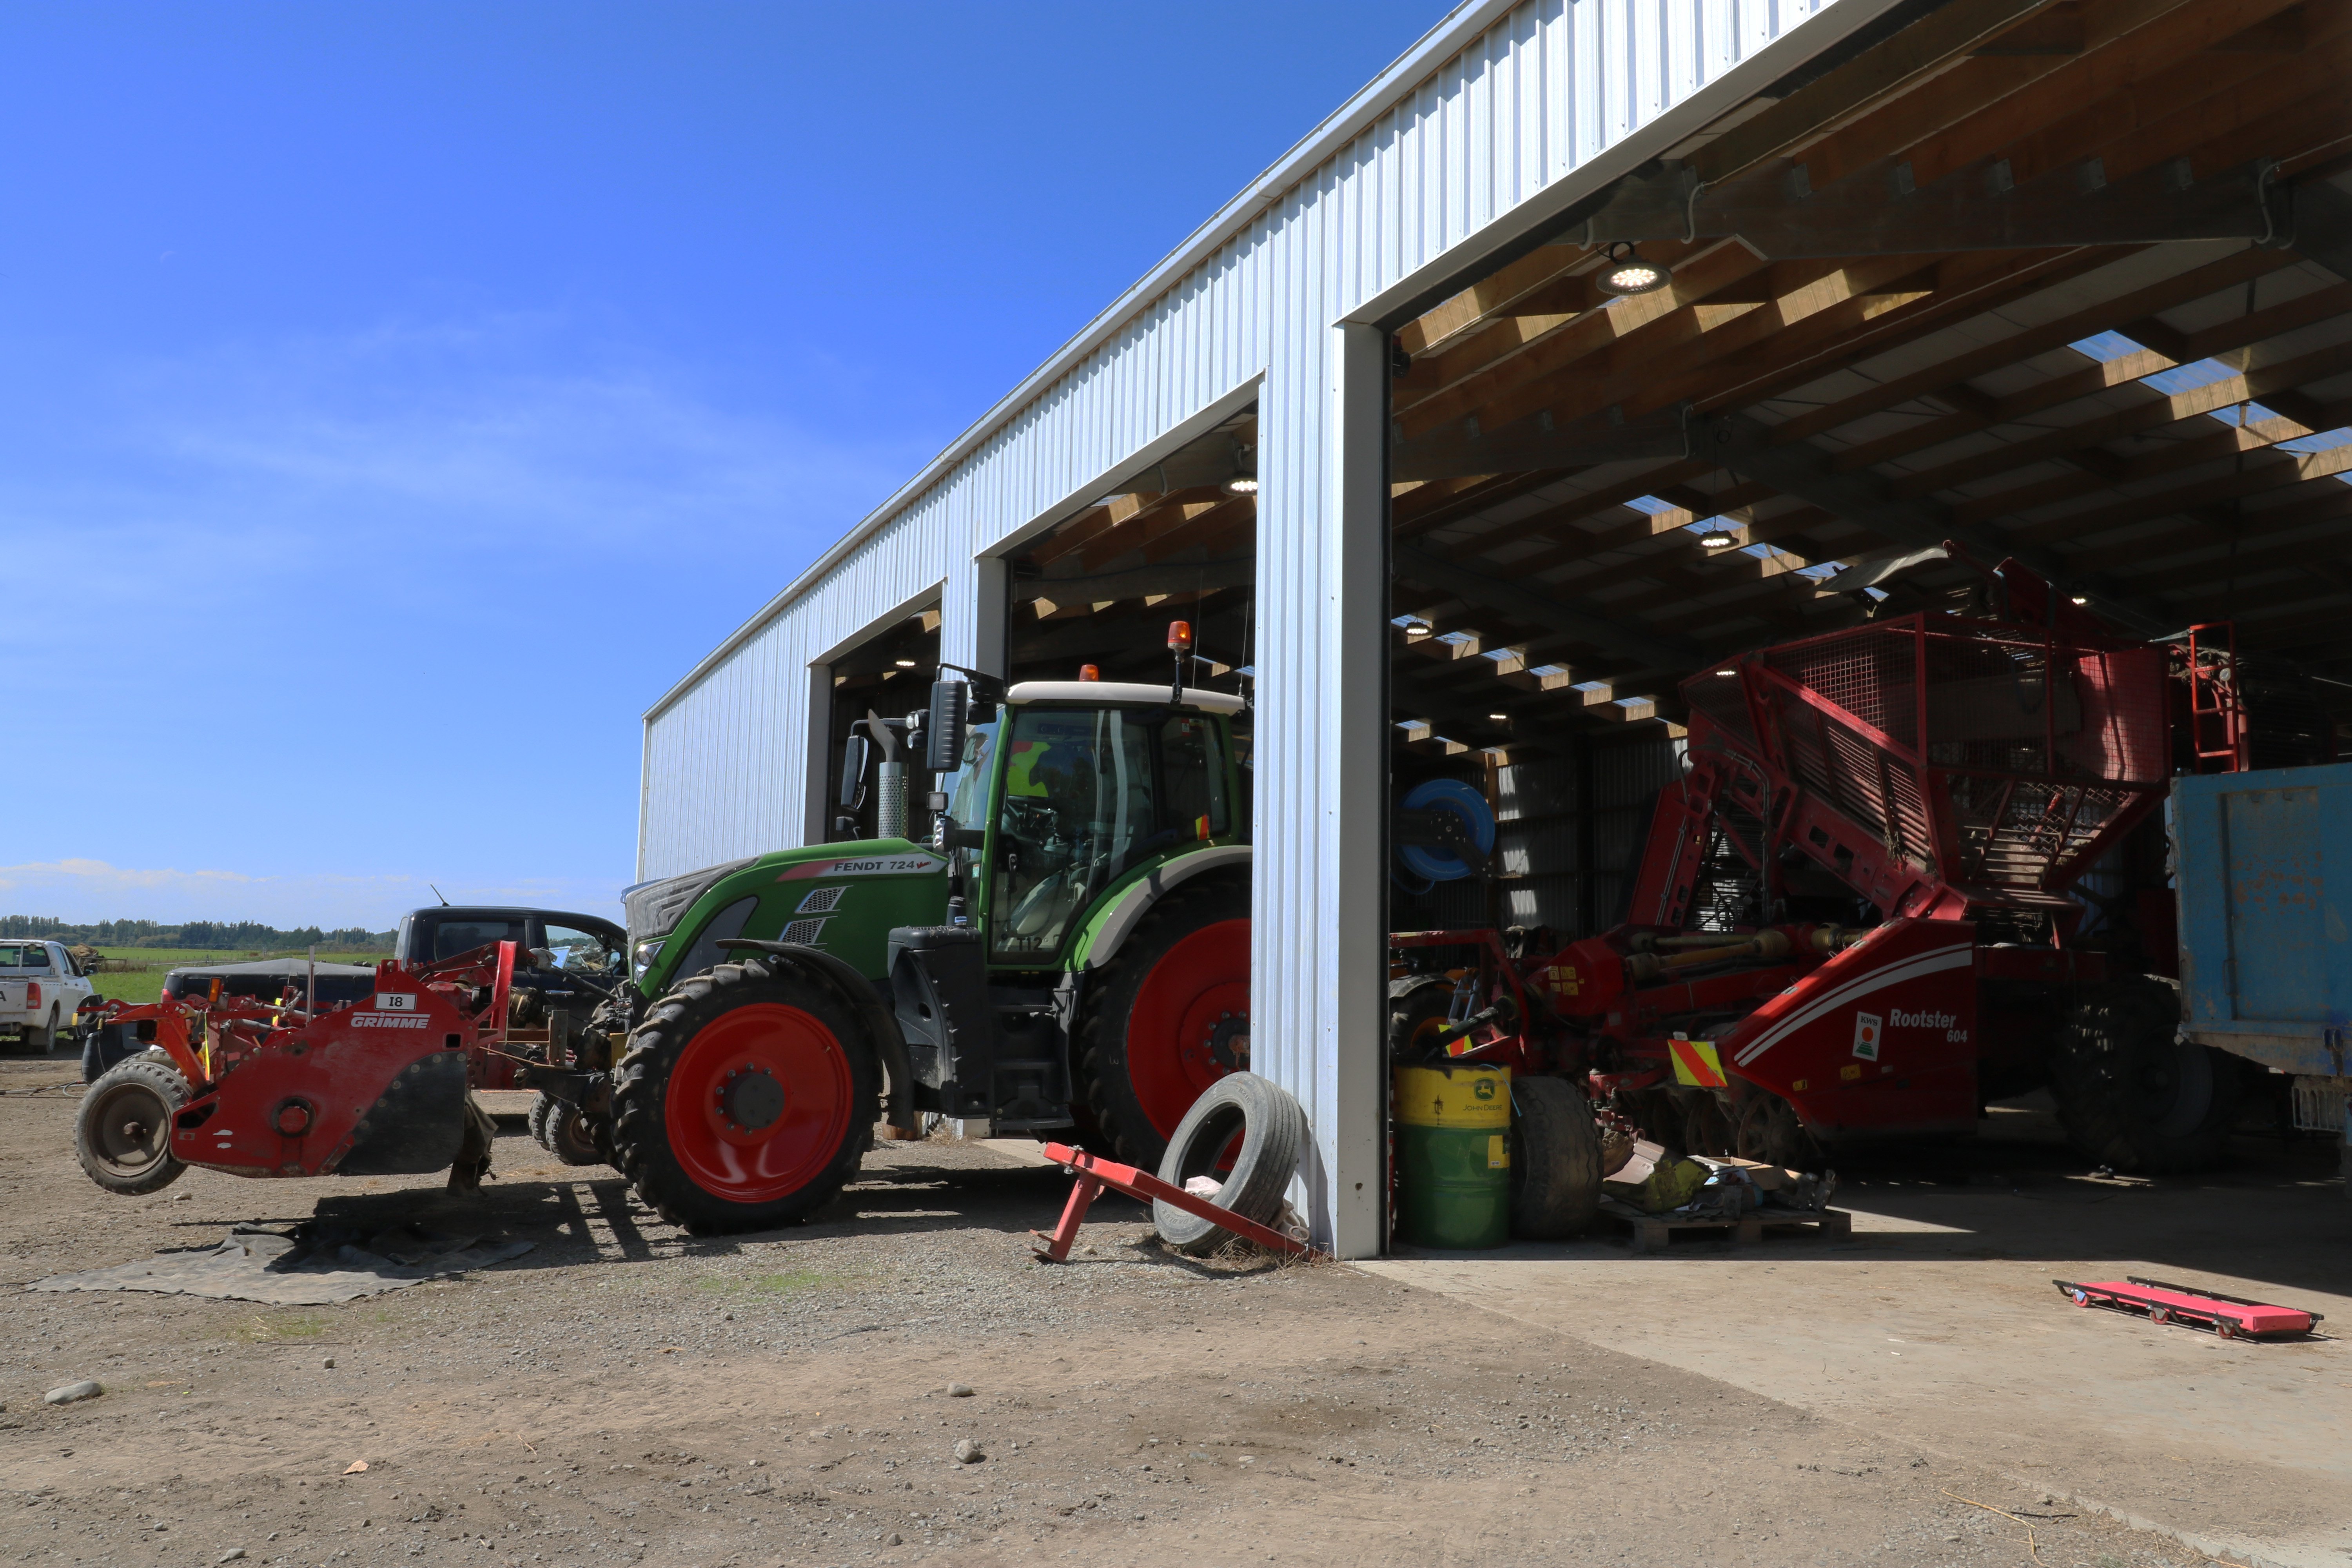 Our Alpine workshops come with plenty of space to store your machinery